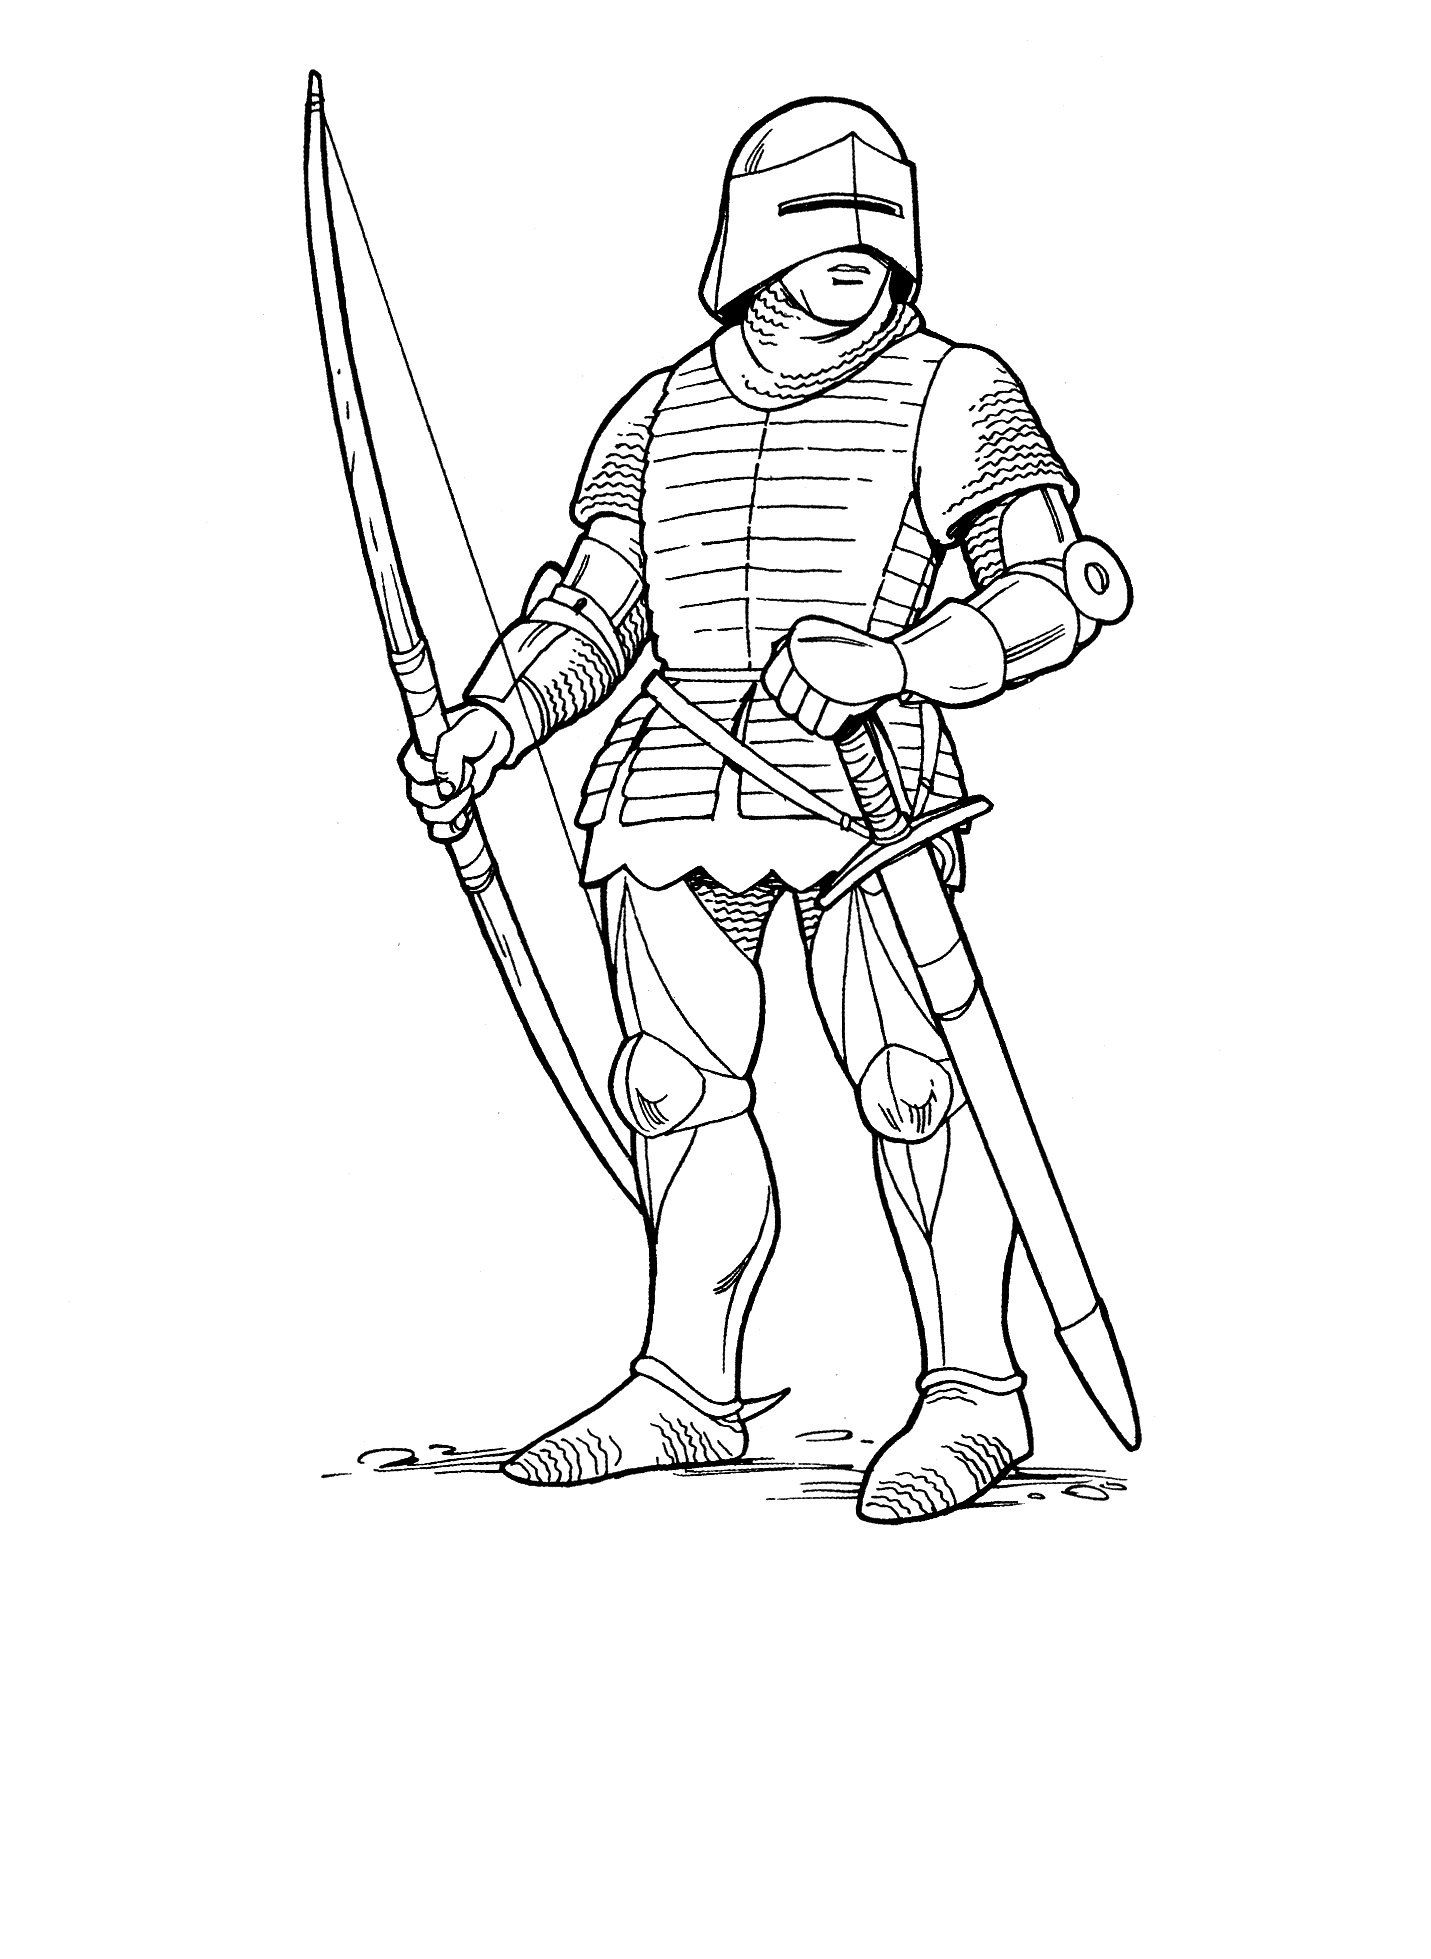 Soldiers and knights coloring pages 4 / Soldiers and Knights ...